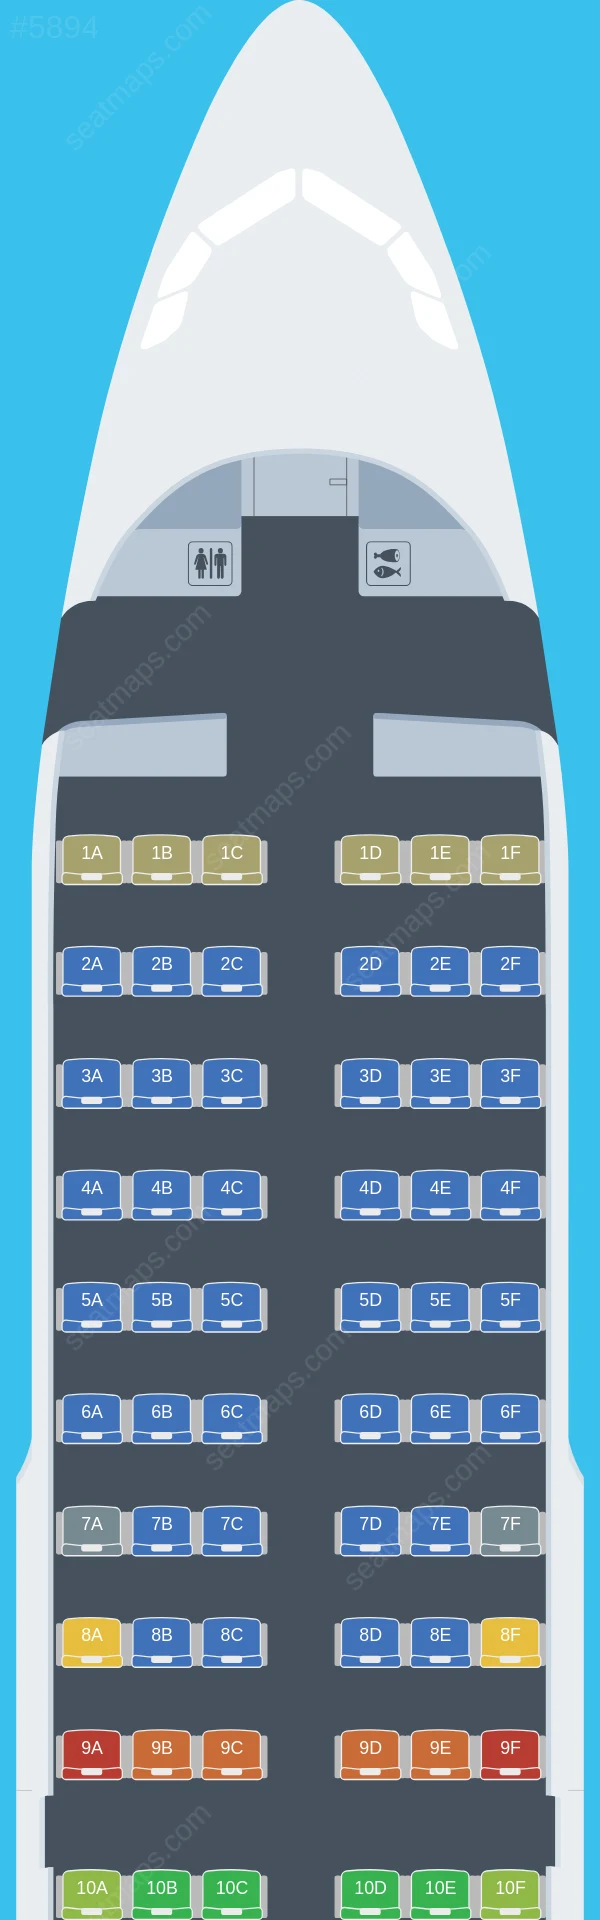 LATAM Airlines Peru Airbus A319-100 seatmap preview